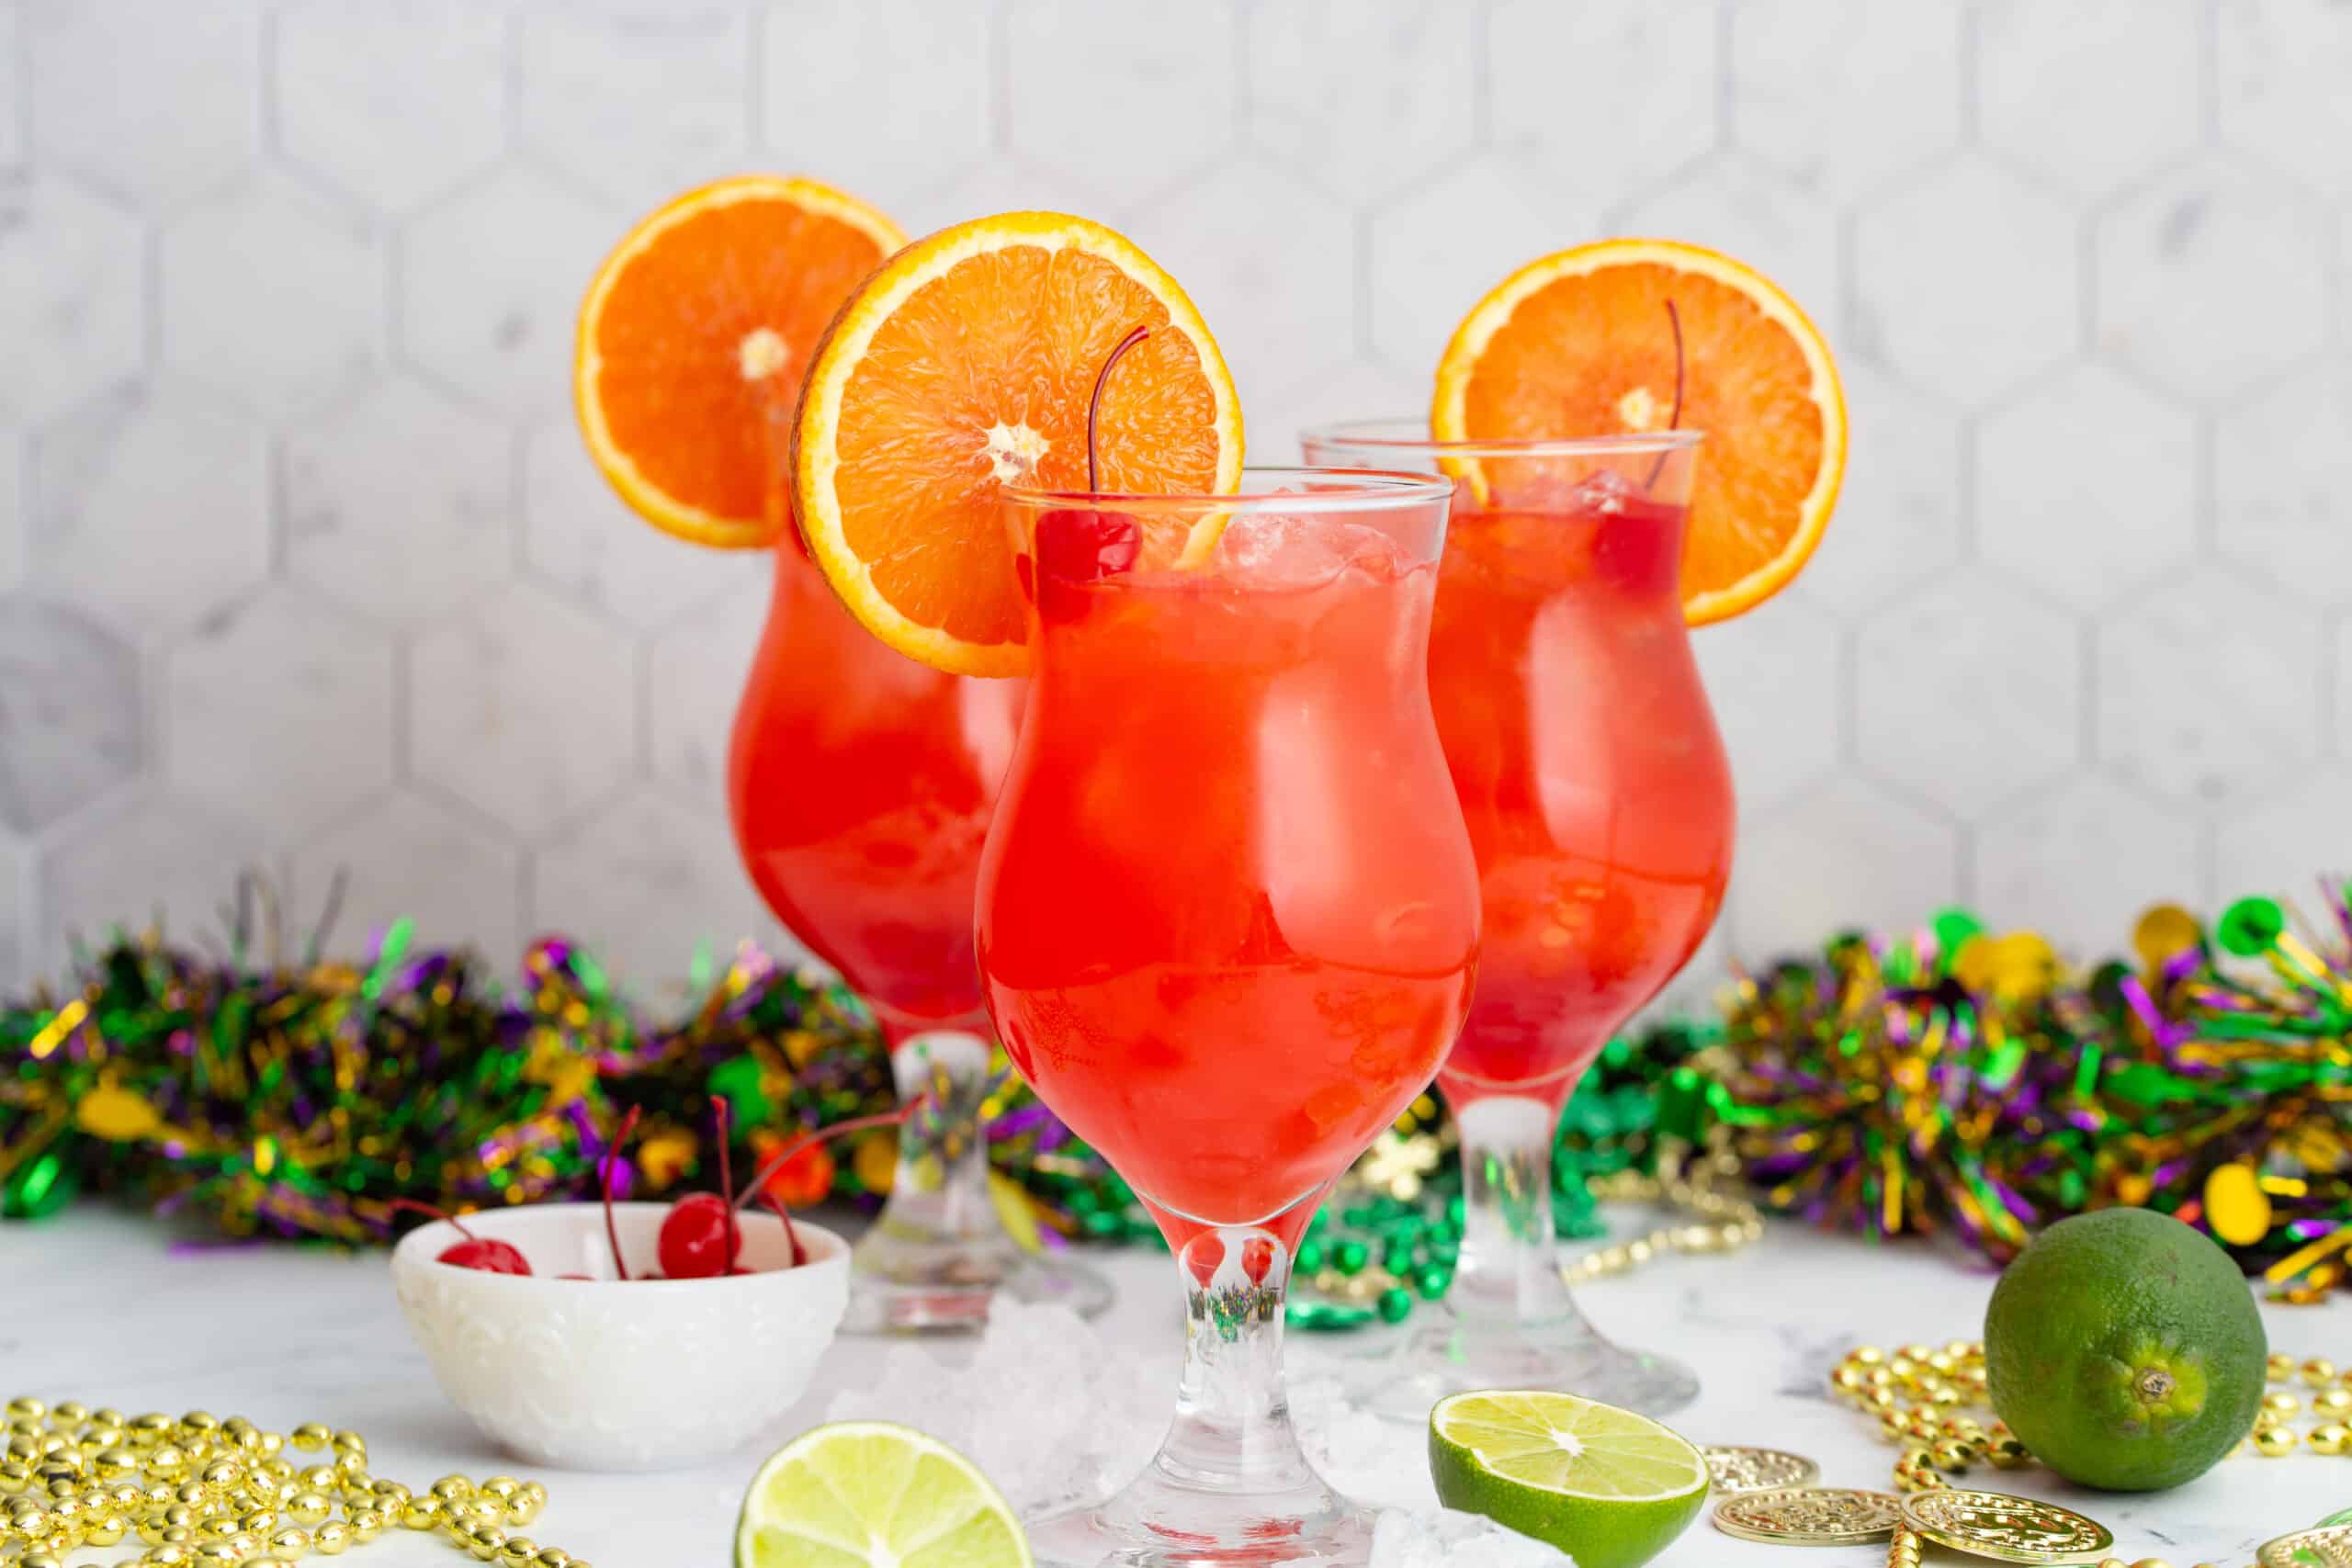 New Orleans non-alcoholic drinks: hurricane mocktail recipe